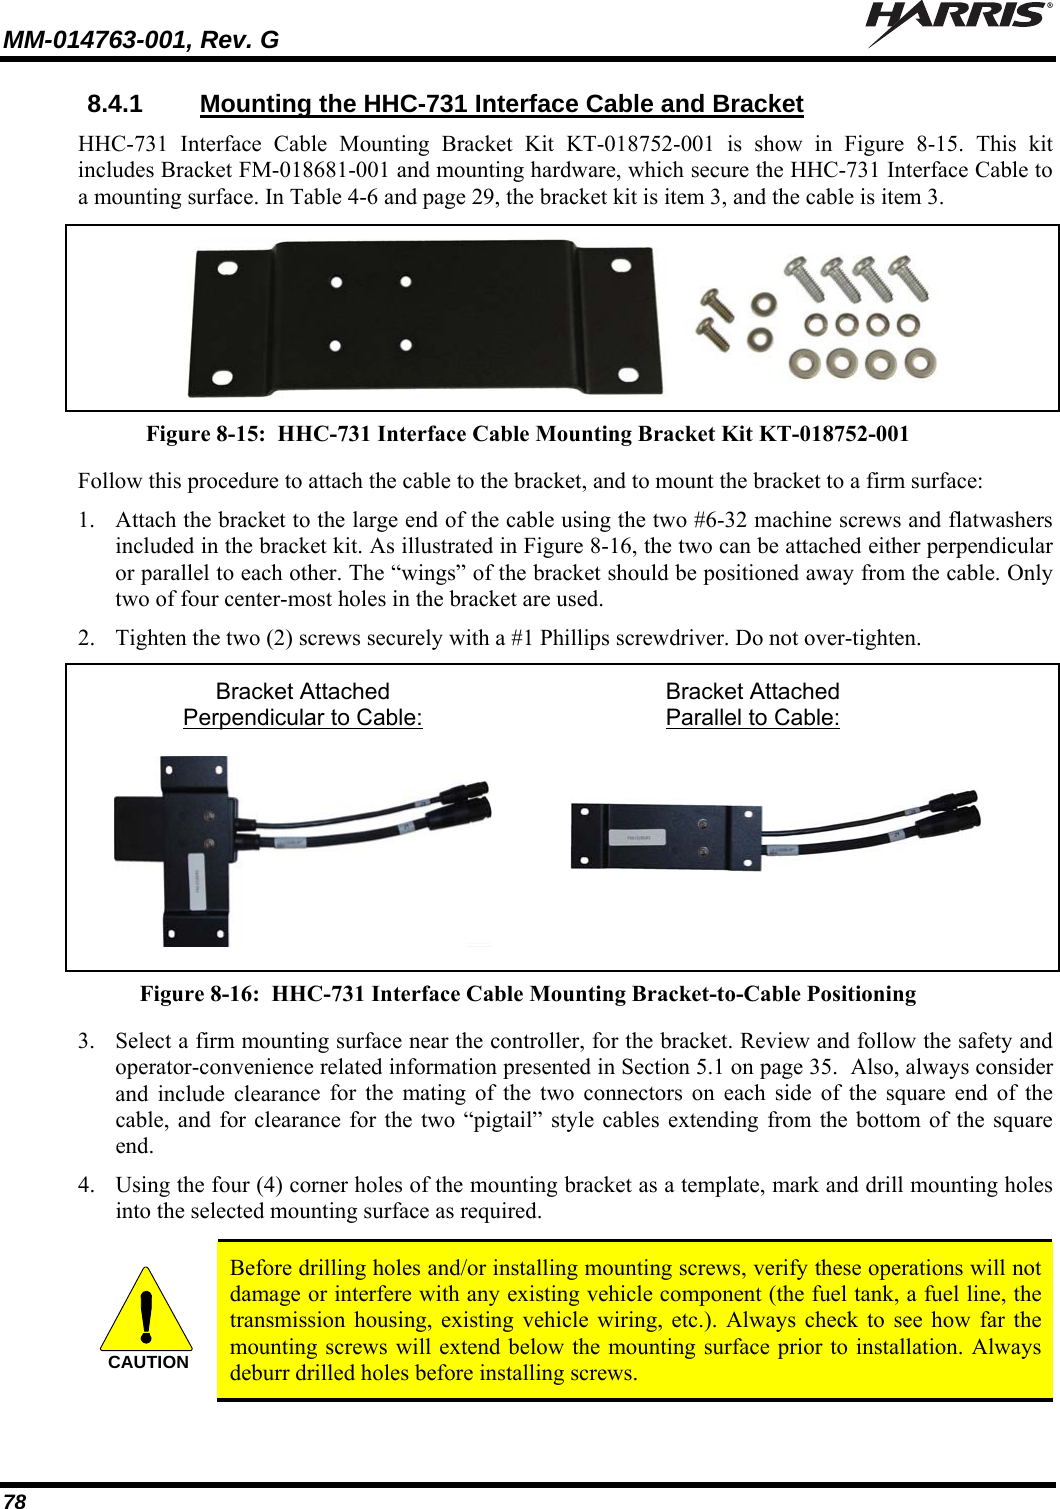 MM-014763-001, Rev. G   78 8.4.1  Mounting the HHC-731 Interface Cable and Bracket HHC-731 Interface Cable Mounting Bracket Kit KT-018752-001 is show in Figure 8-15. This kit includes Bracket FM-018681-001 and mounting hardware, which secure the HHC-731 Interface Cable to a mounting surface. In Table 4-6 and page 29, the bracket kit is item 3, and the cable is item 3.   Figure 8-15:  HHC-731 Interface Cable Mounting Bracket Kit KT-018752-001 Follow this procedure to attach the cable to the bracket, and to mount the bracket to a firm surface: 1. Attach the bracket to the large end of the cable using the two #6-32 machine screws and flatwashers included in the bracket kit. As illustrated in Figure 8-16, the two can be attached either perpendicular or parallel to each other. The “wings” of the bracket should be positioned away from the cable. Only two of four center-most holes in the bracket are used. 2. Tighten the two (2) screws securely with a #1 Phillips screwdriver. Do not over-tighten.   Bracket Attached  Bracket Attached    Perpendicular to Cable:  Parallel to Cable:     Figure 8-16:  HHC-731 Interface Cable Mounting Bracket-to-Cable Positioning 3. Select a firm mounting surface near the controller, for the bracket. Review and follow the safety and operator-convenience related information presented in Section 5.1 on page 35.  Also, always consider and include clearance for the mating of the two connectors on each side of the square end of the cable, and for clearance for the two “pigtail” style cables extending from the bottom of the square end. 4. Using the four (4) corner holes of the mounting bracket as a template, mark and drill mounting holes into the selected mounting surface as required.  CAUTION  Before drilling holes and/or installing mounting screws, verify these operations will not damage or interfere with any existing vehicle component (the fuel tank, a fuel line, the transmission housing, existing vehicle wiring, etc.). Always check to see how far the mounting screws will extend below the mounting surface prior to installation. Always deburr drilled holes before installing screws.  